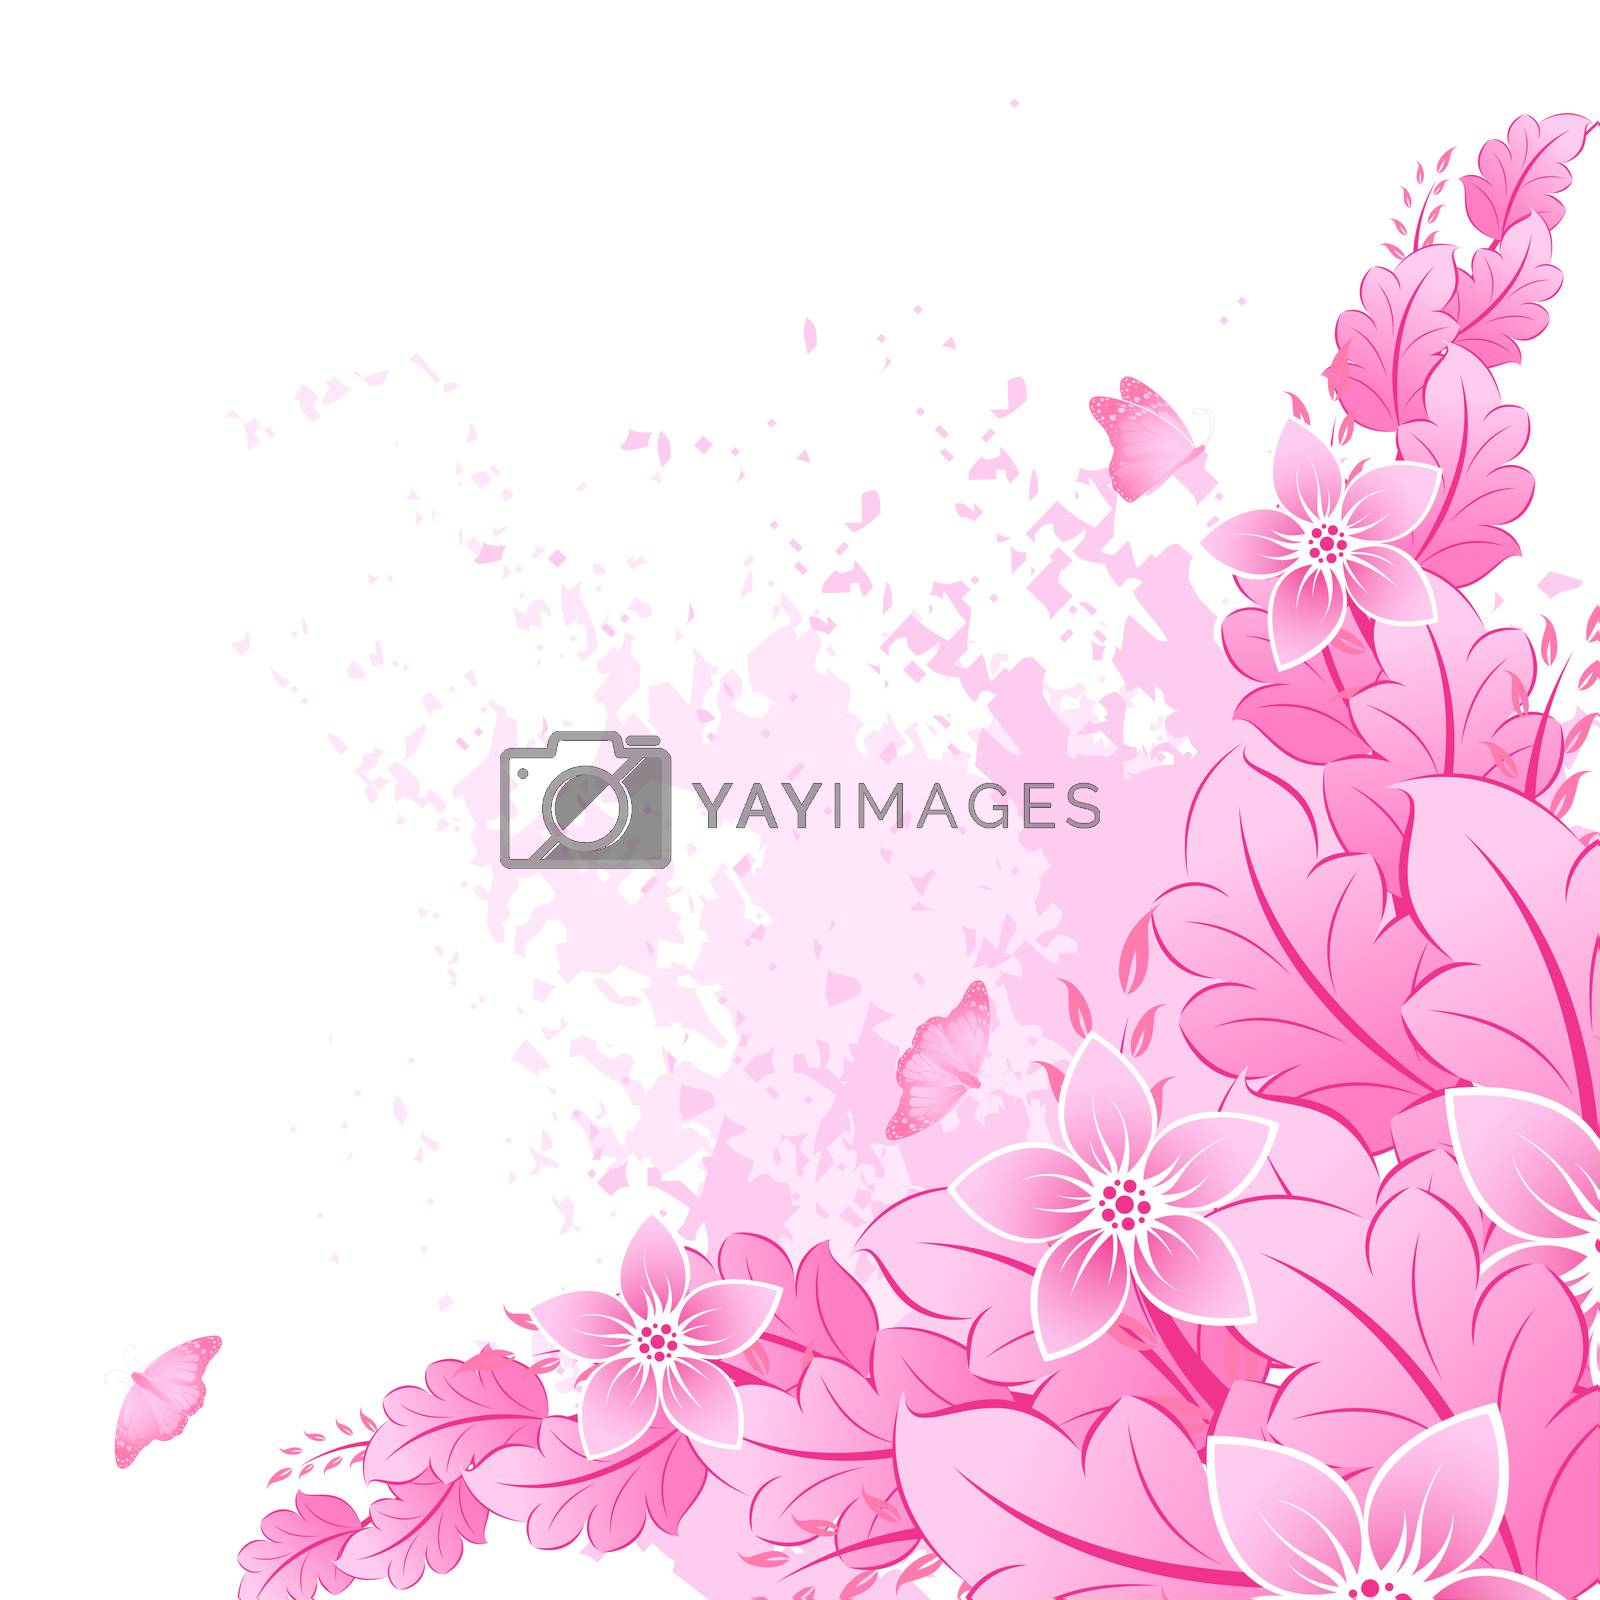 Royalty free image of Spring in pink by WaD